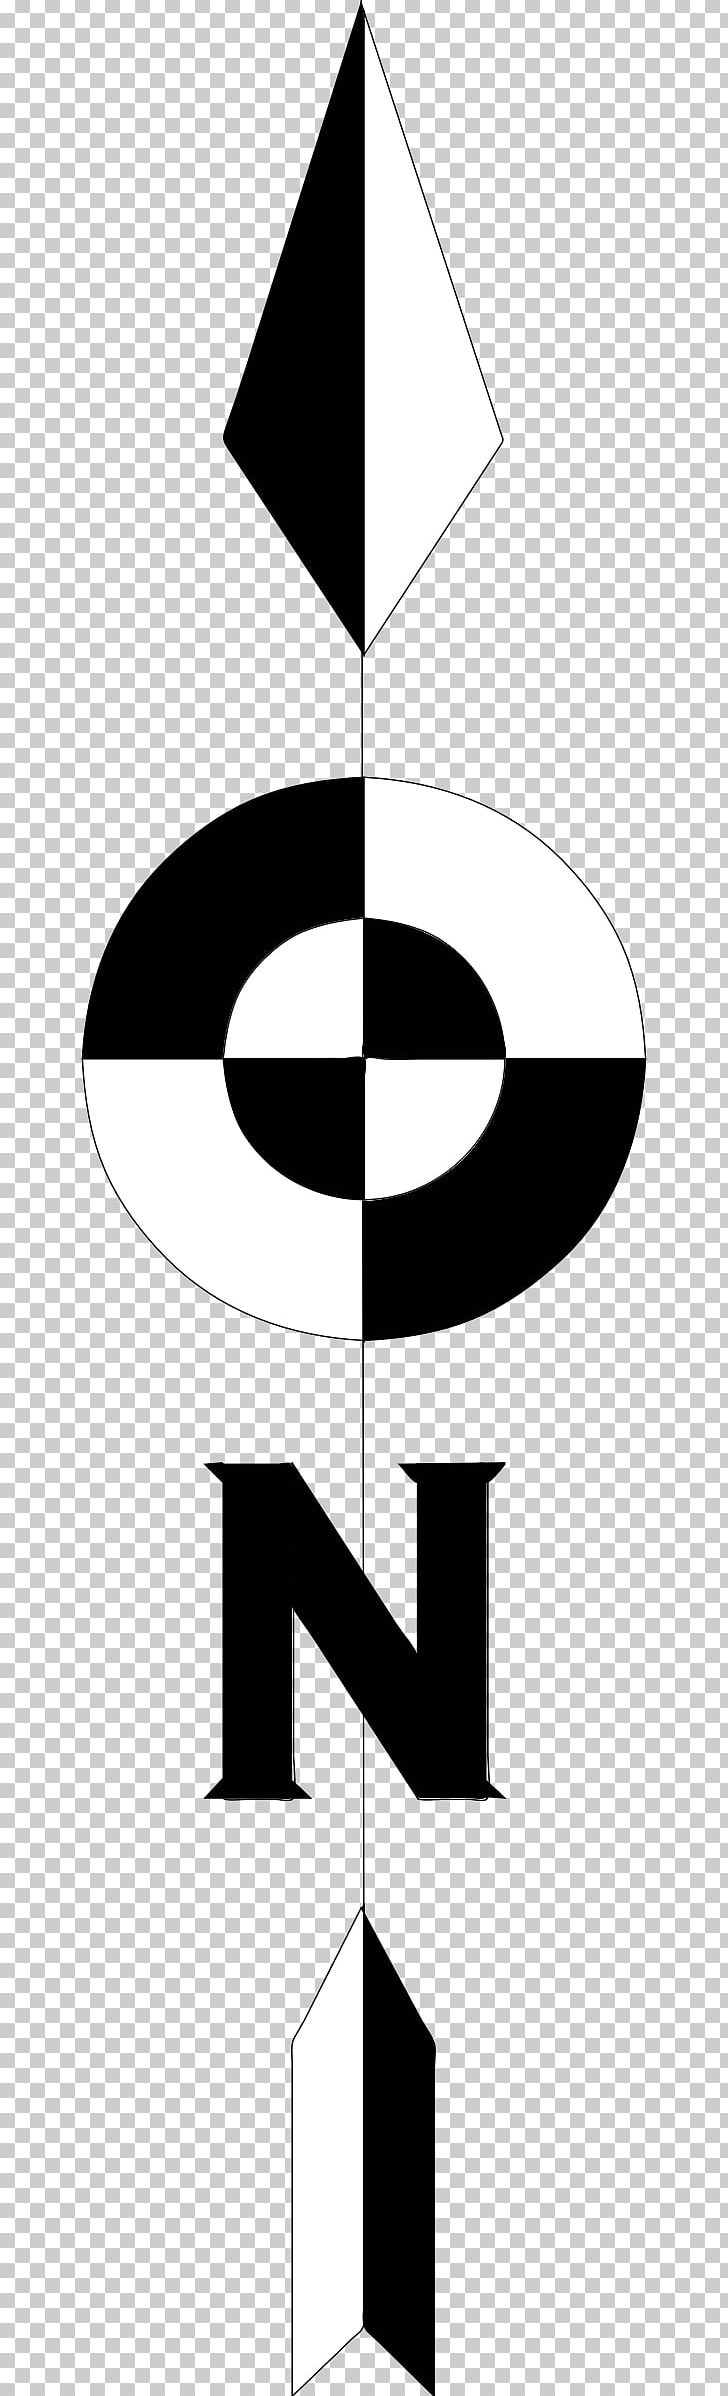 North Arrow Computer Icons PNG, Clipart, Arrow, Black And White, Clip Art, Compass, Compass Rose Free PNG Download